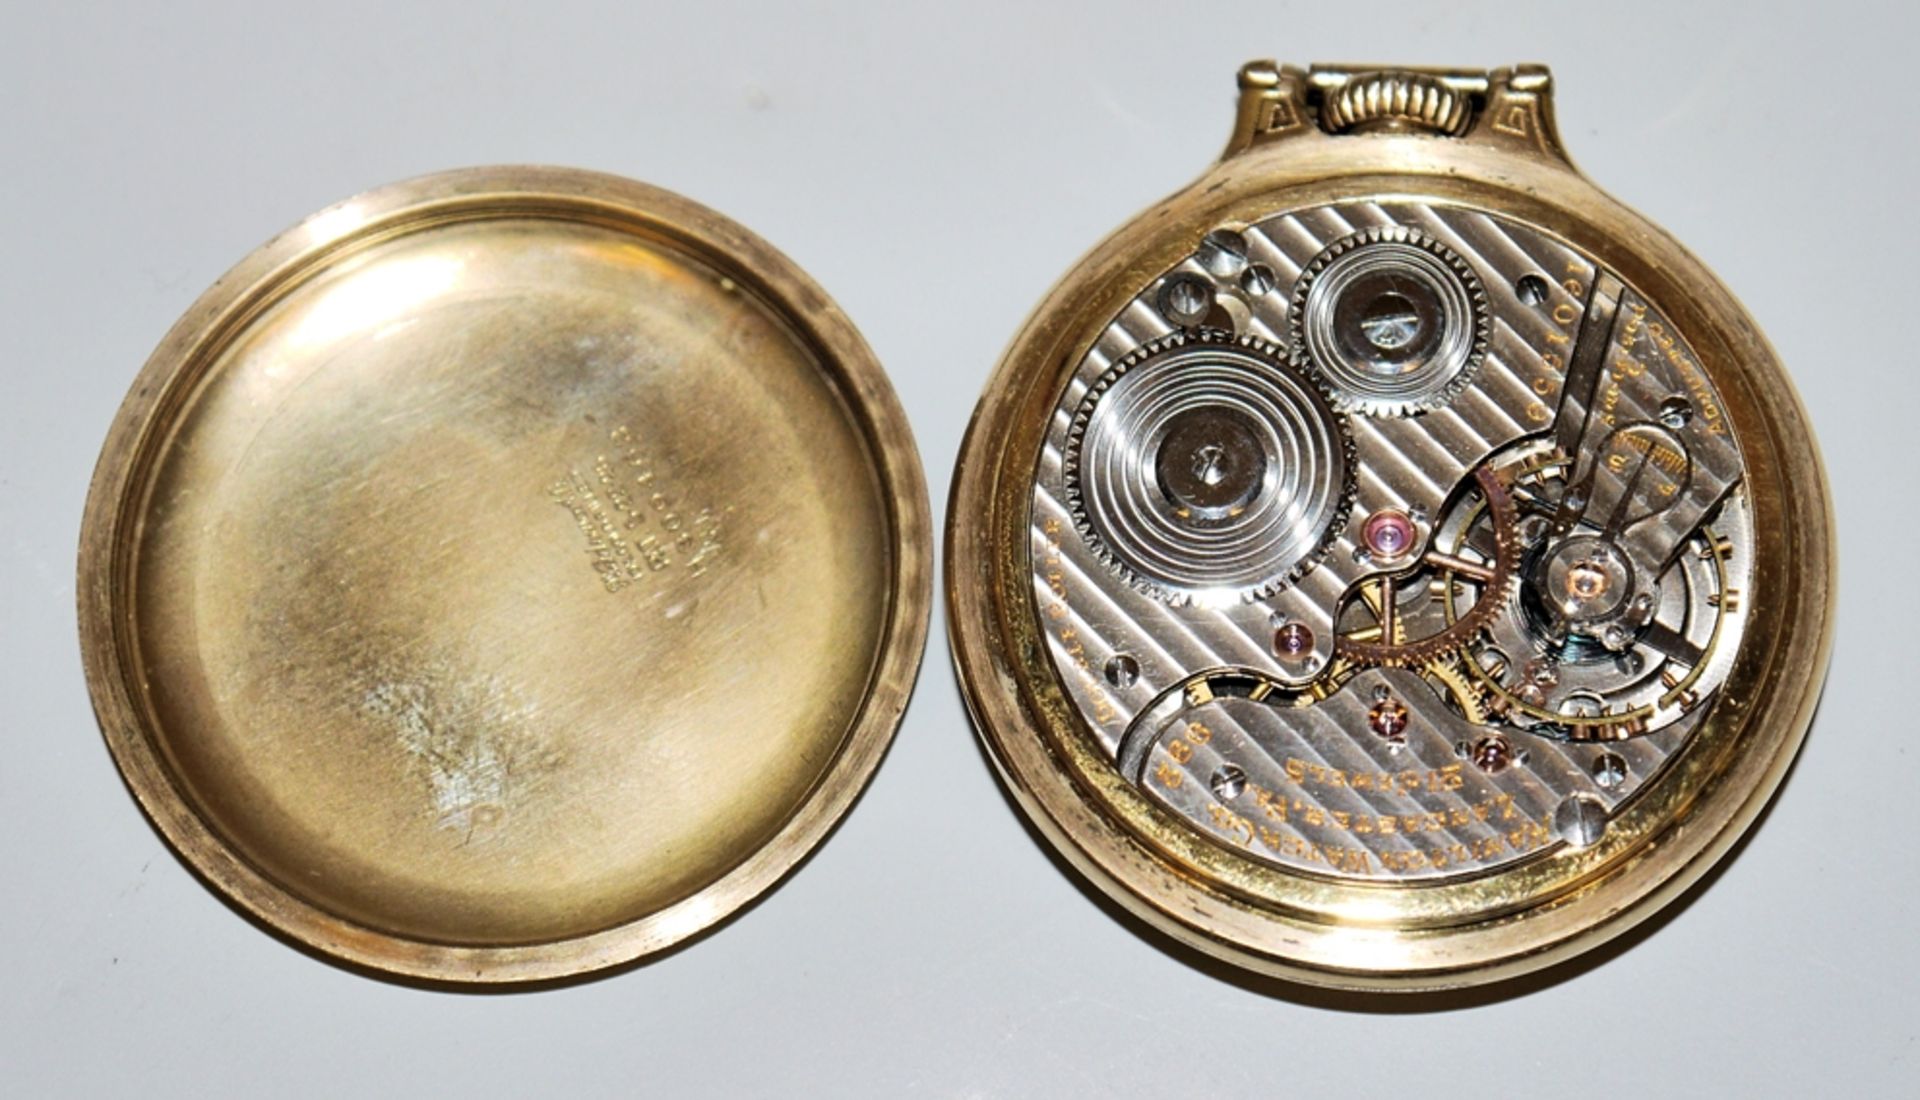 Pocket watch with concealed hands, Hamilton Watch Co., USA 1918 - Image 3 of 3